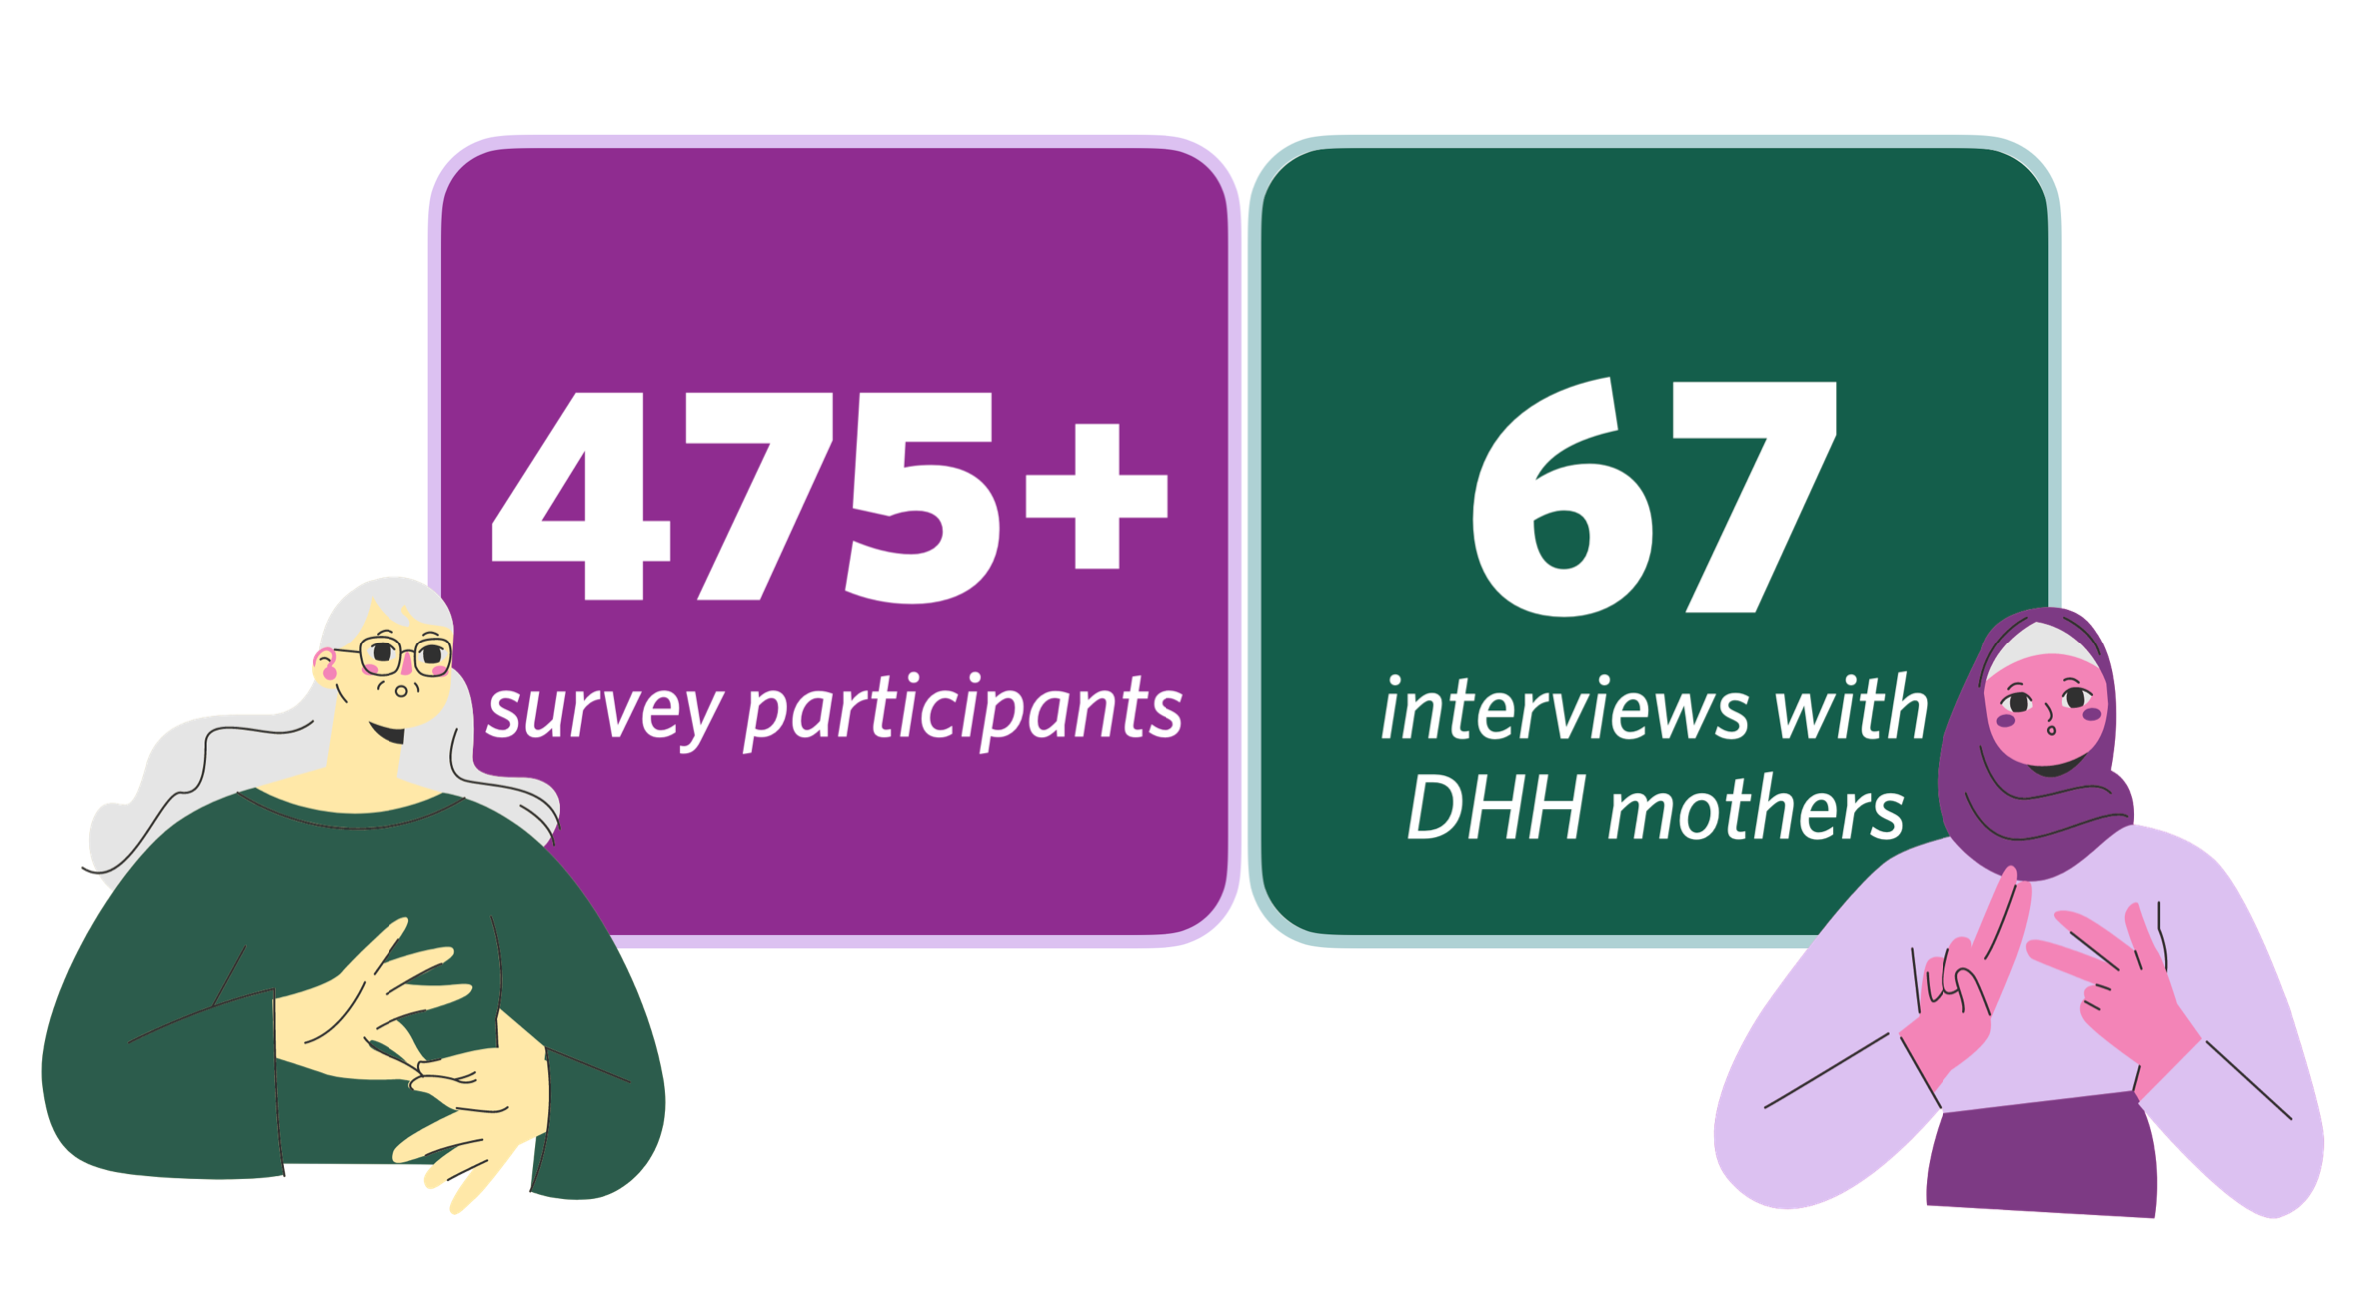 An infographic saying “475+ survey paritcipants” and “67 interviews with DHH mothers.” Next to the text are stylized drawings of Deaf women using sign language.